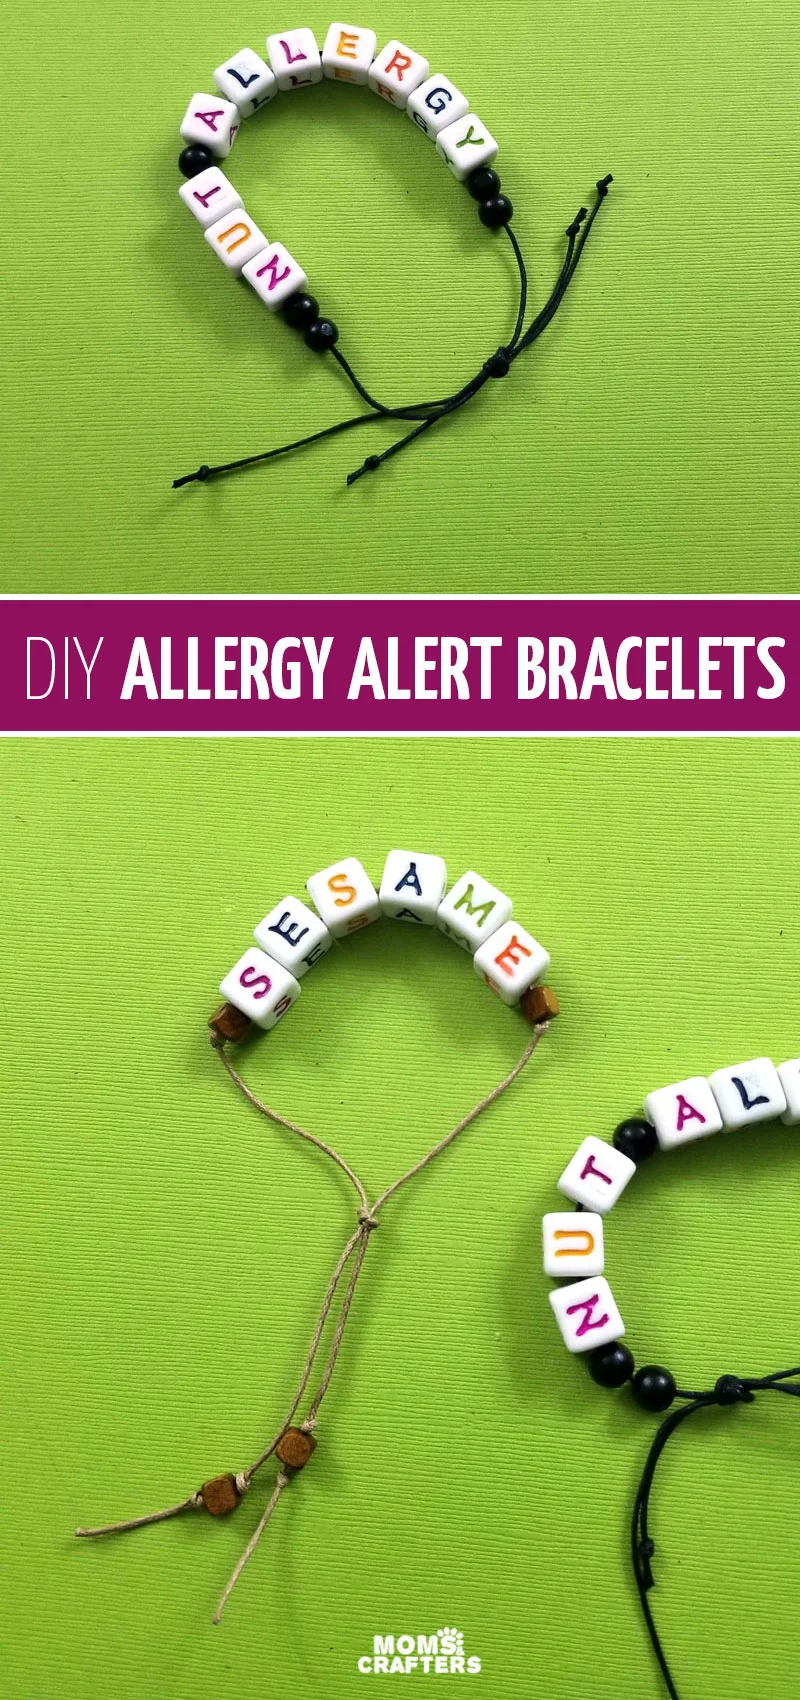 How To Communicate Your Allergy With A Medical Alert Bracelet - Butler and  Grace Ltd